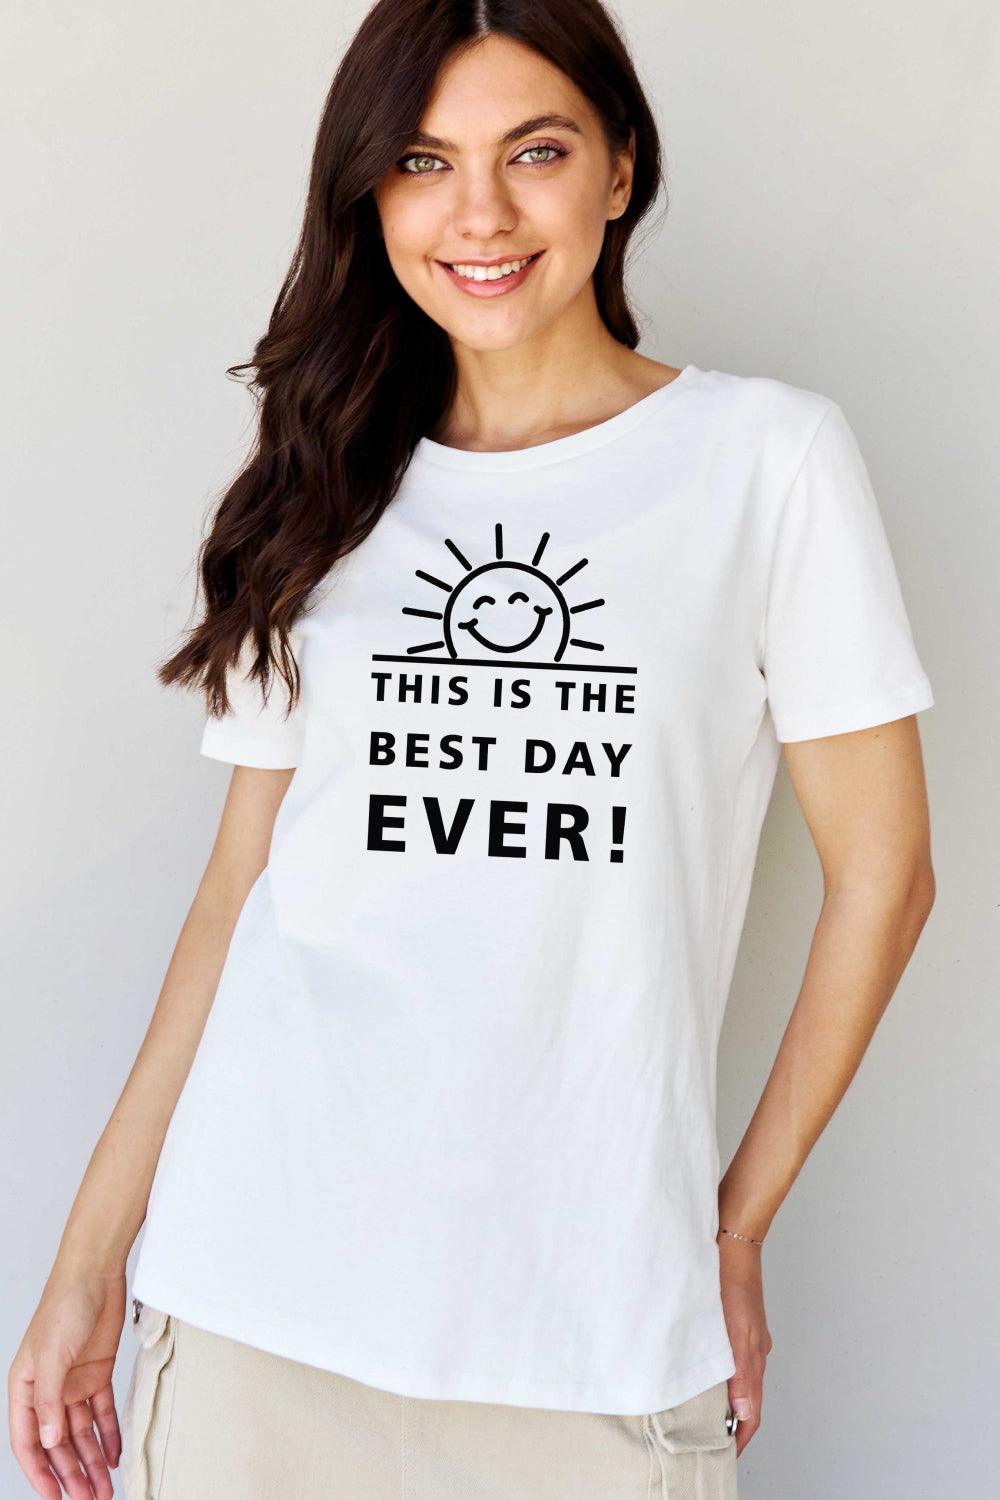 Simply Love Full Size THIS IS THE BEST DAY EVER! Graphic Cotton T-Shirt - Vesteeto